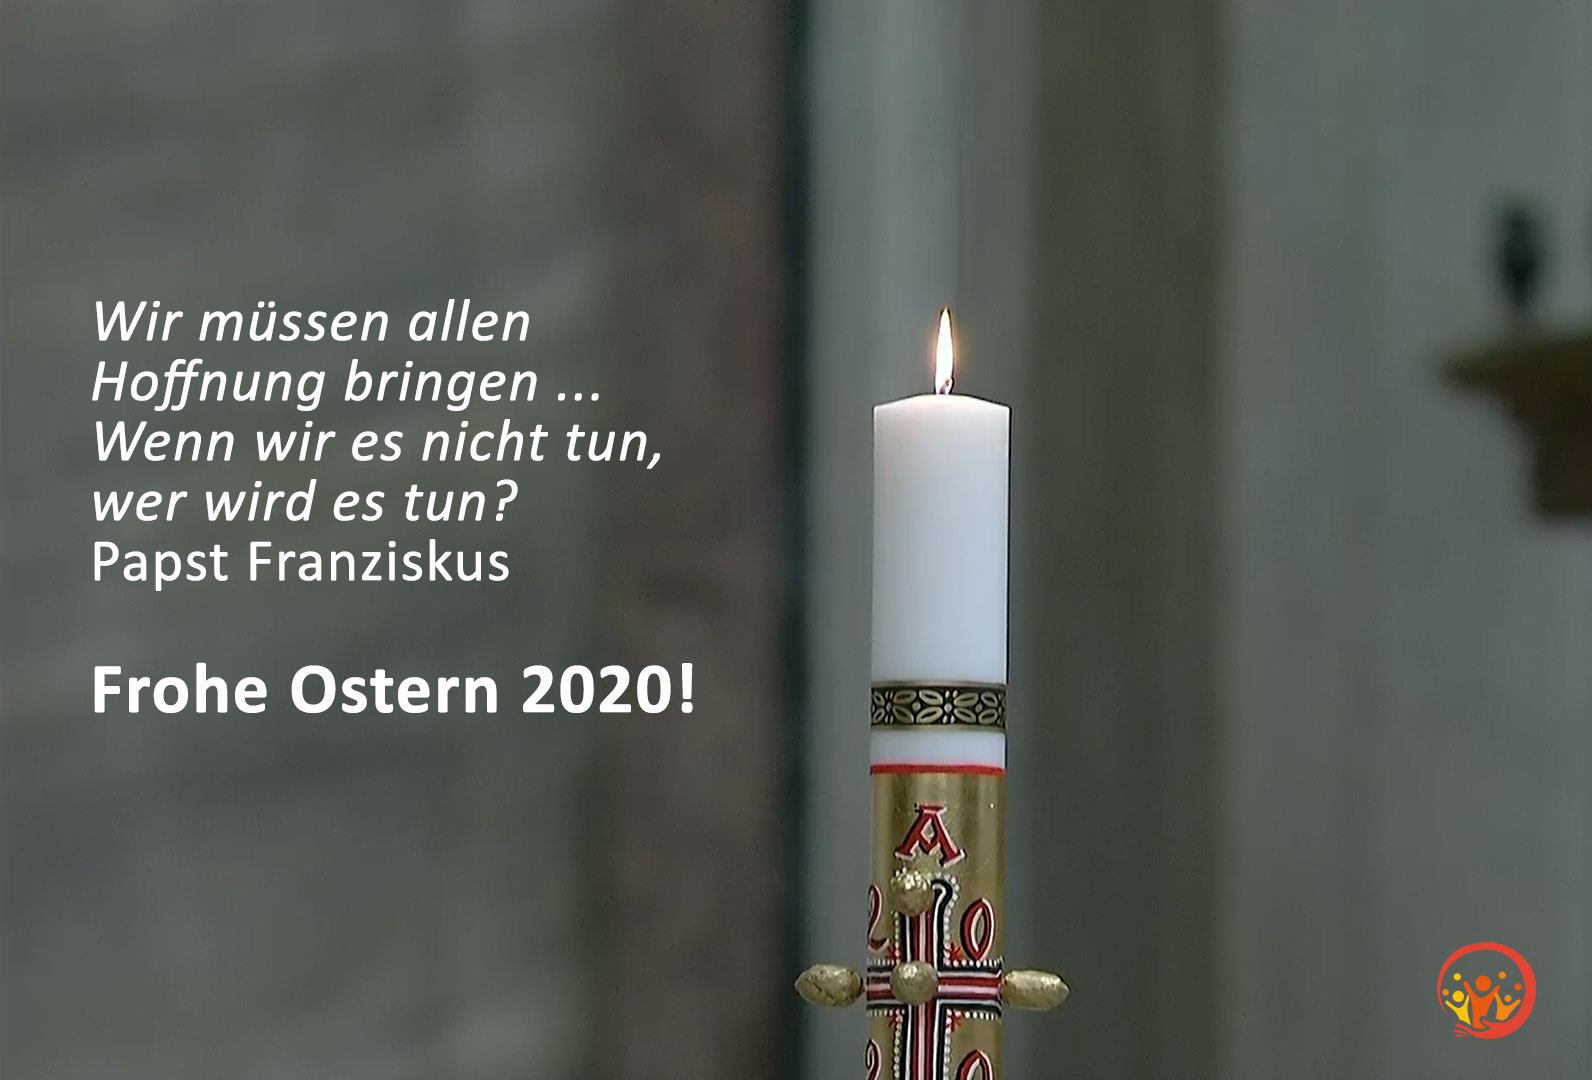 Frohe Ostern 2020!